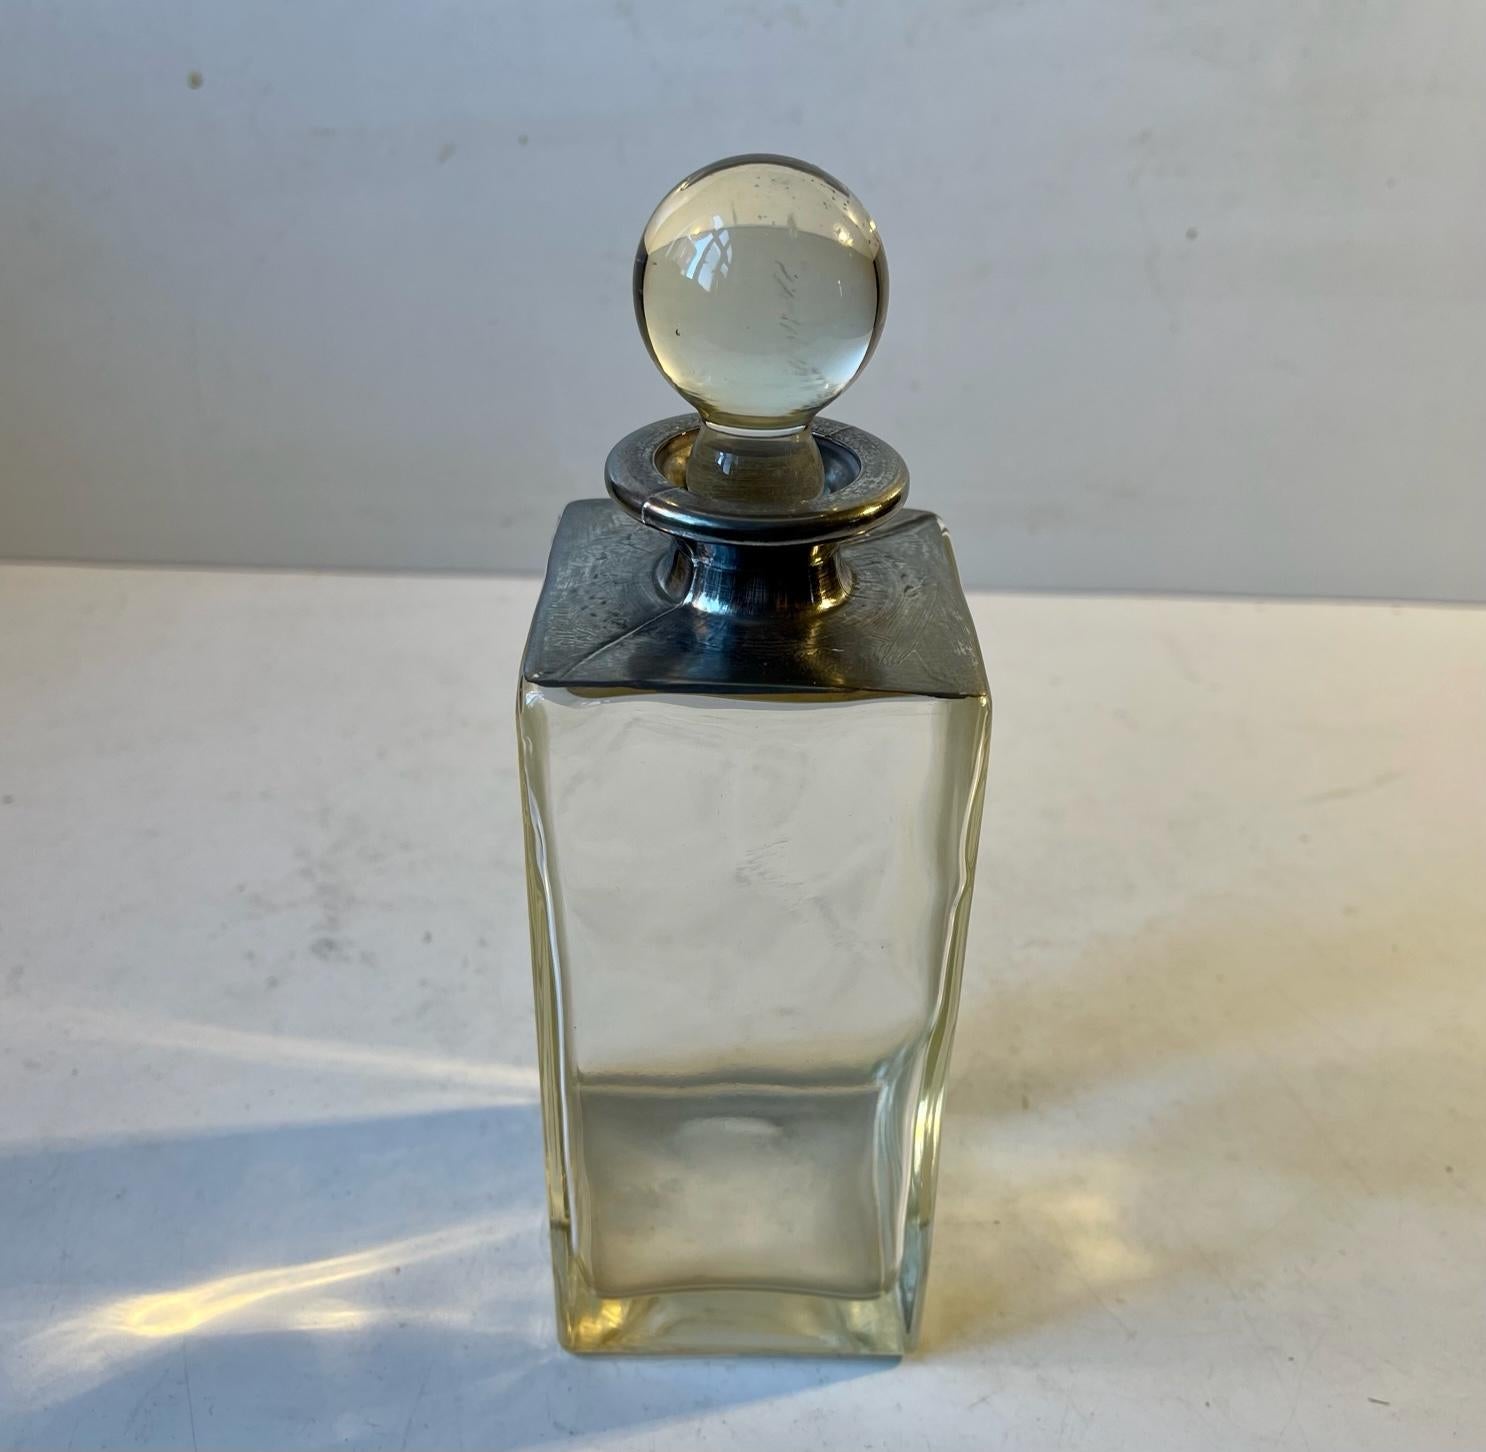 Small rectangular decanter in thick glass decorated with a top in pewter/white metal. Distinct Bauhaus styling. Manufactured in Germany or Scandinavia circa 1930. Measurements: H: 20/16 cm, W/D: 7 cm. Capacity: 0.4 liter.